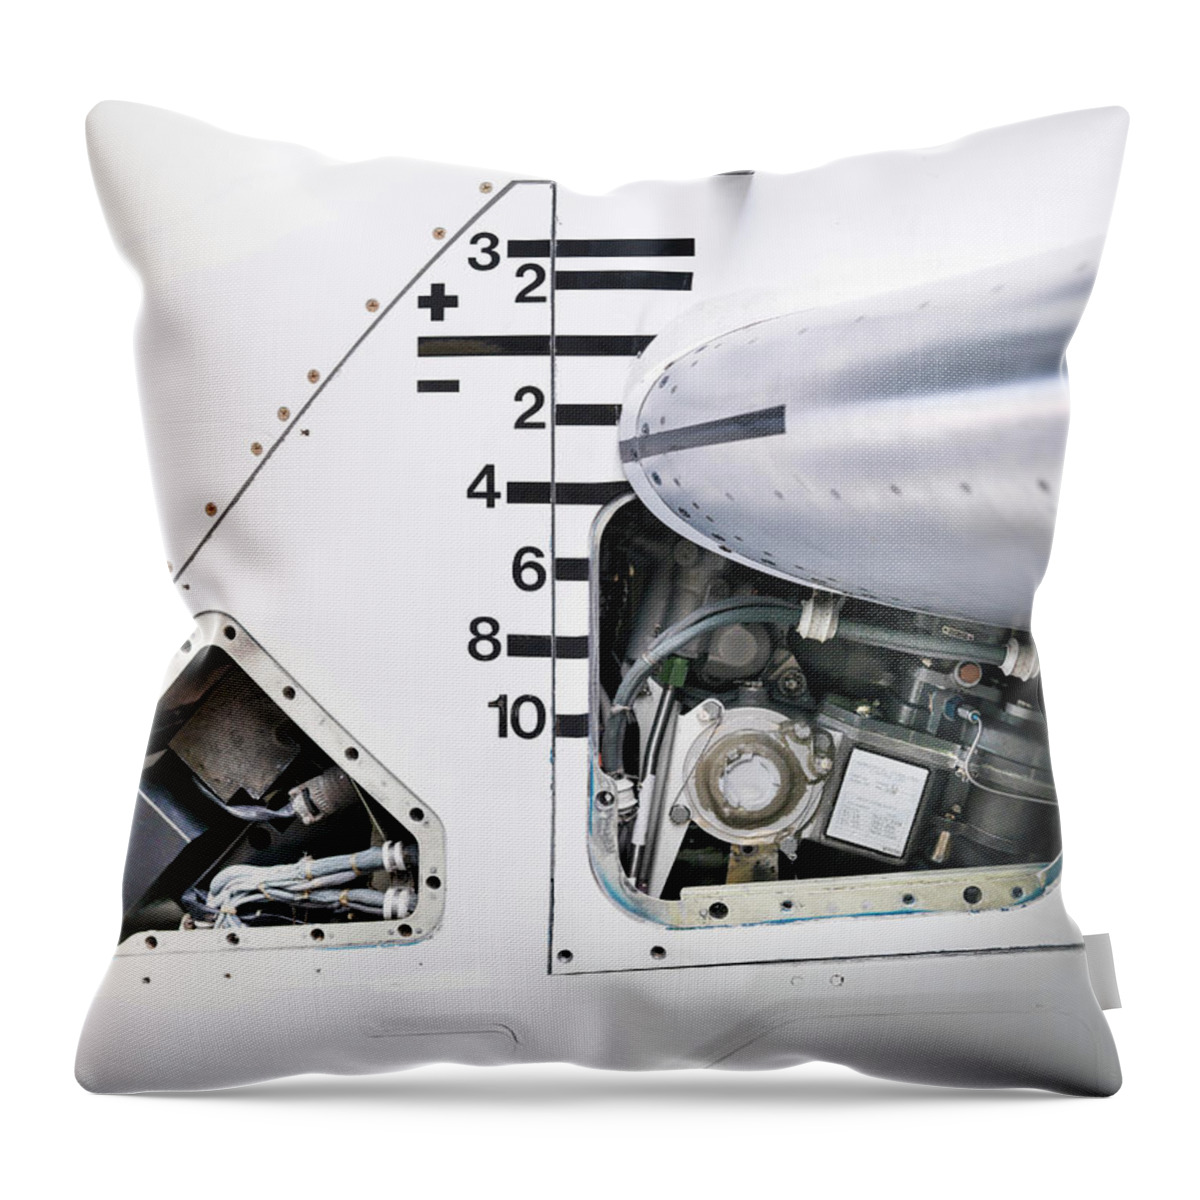 Airplane Throw Pillow featuring the photograph Detail View Of Tail Mechanism Of Jet by Monty Rakusen